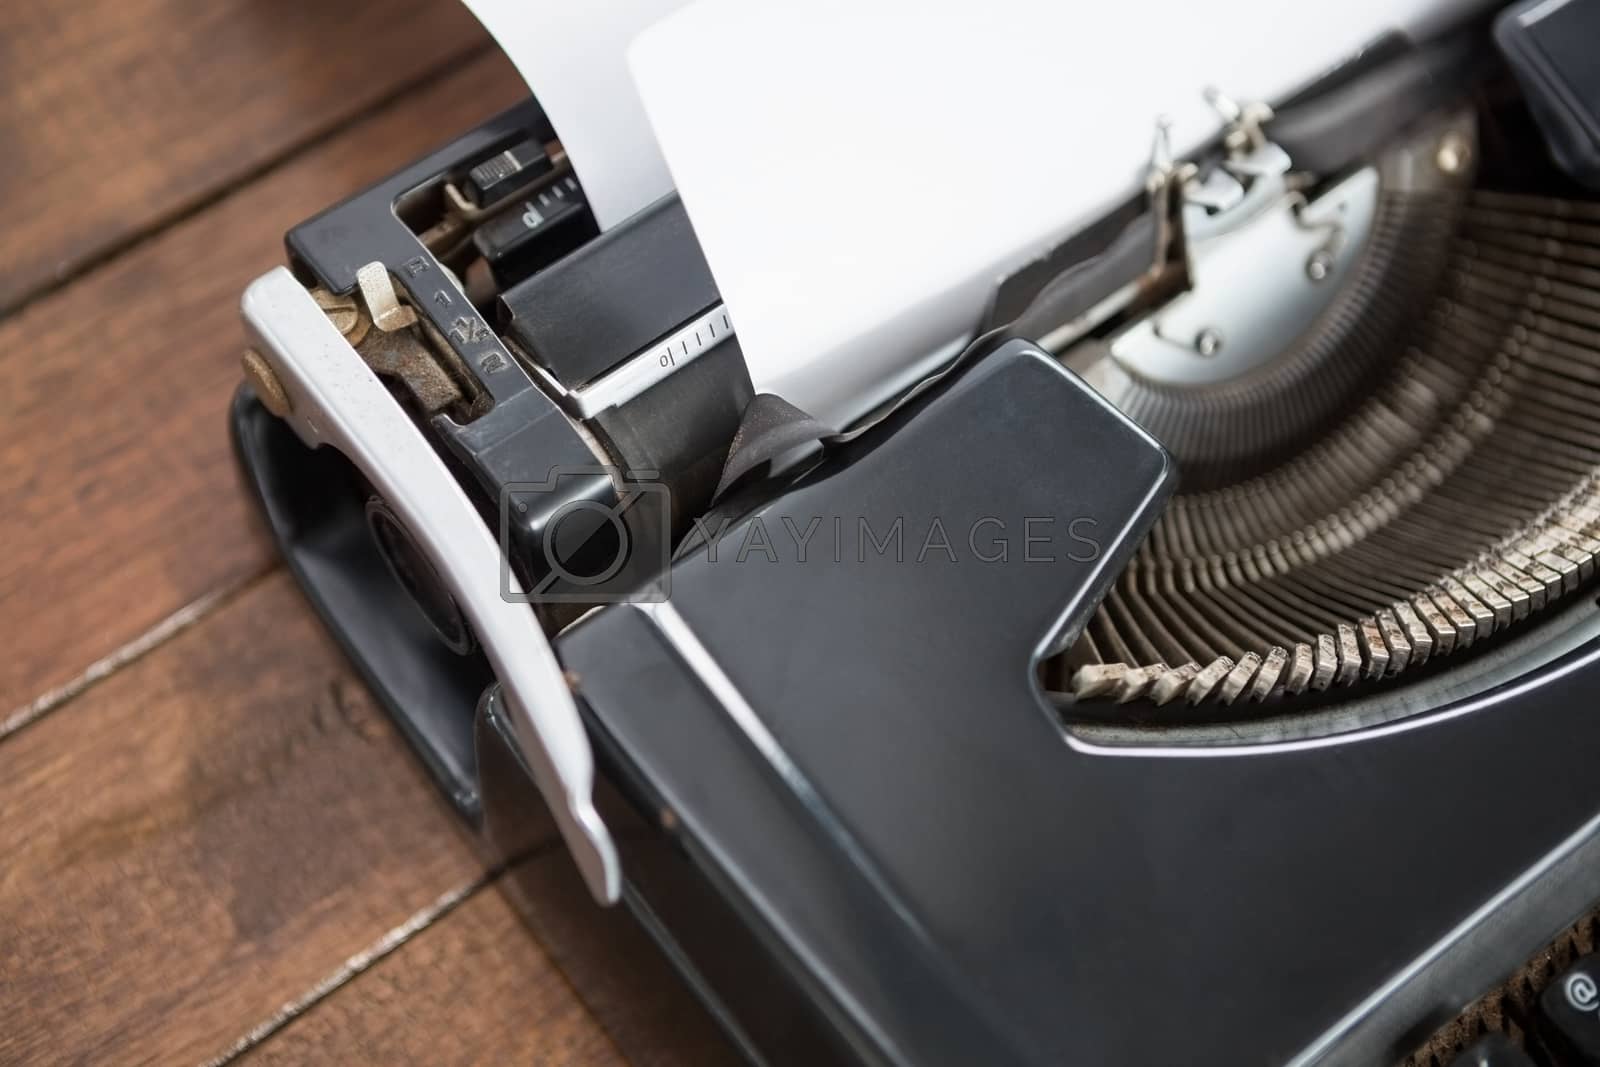 Royalty free image of close up view of typewriter by Wavebreakmedia